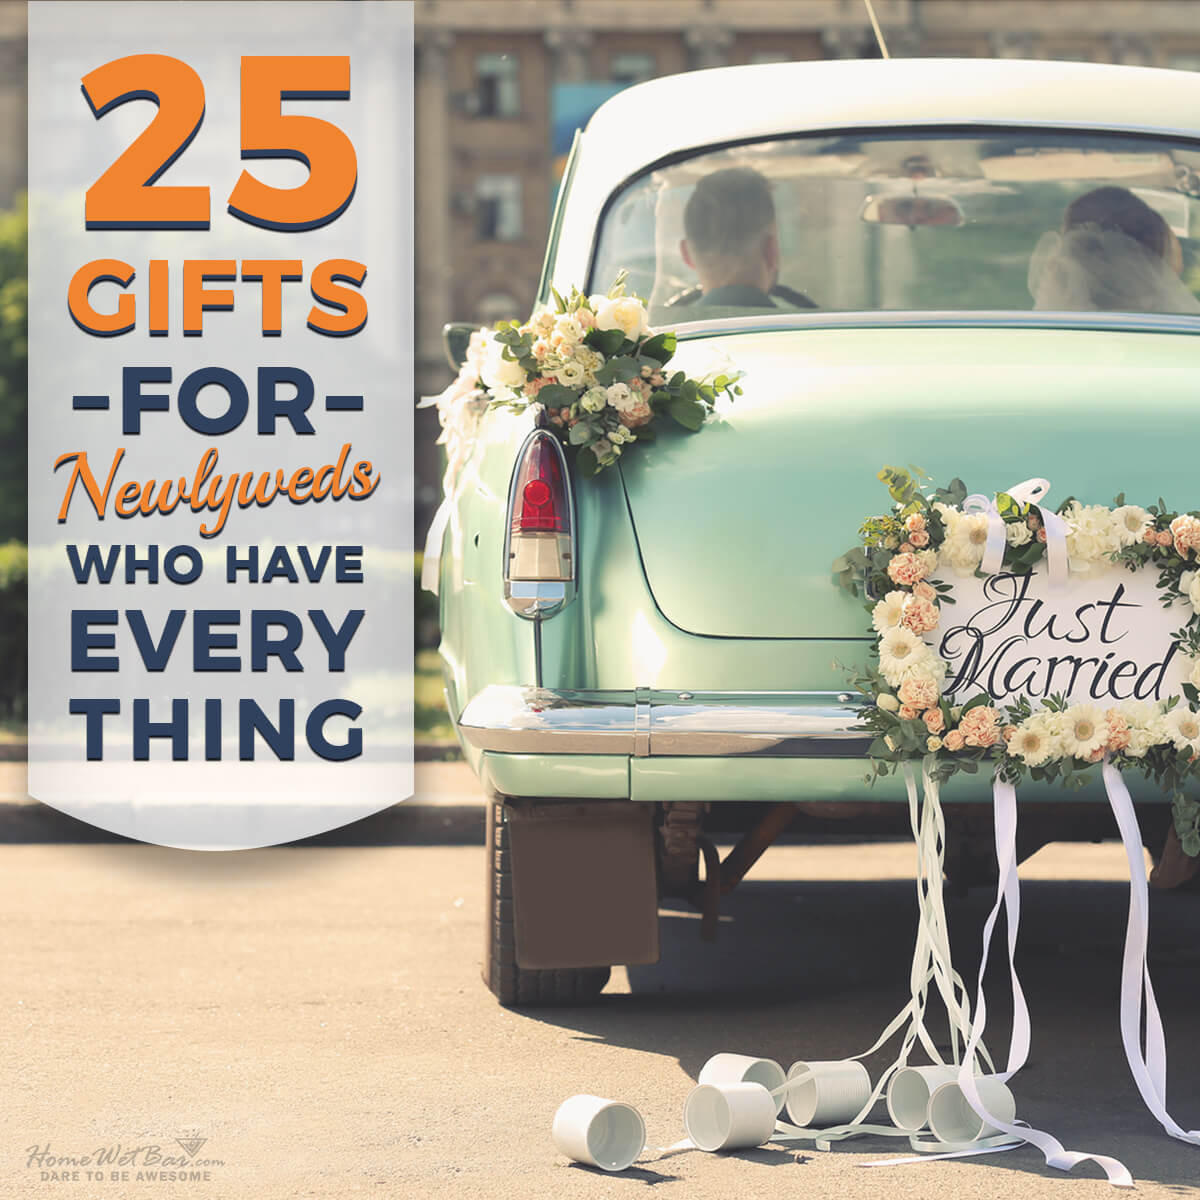 Christmas Gift Ideas For A Couple That Has Everything
 25 Gifts for Newlyweds Who Have Everything